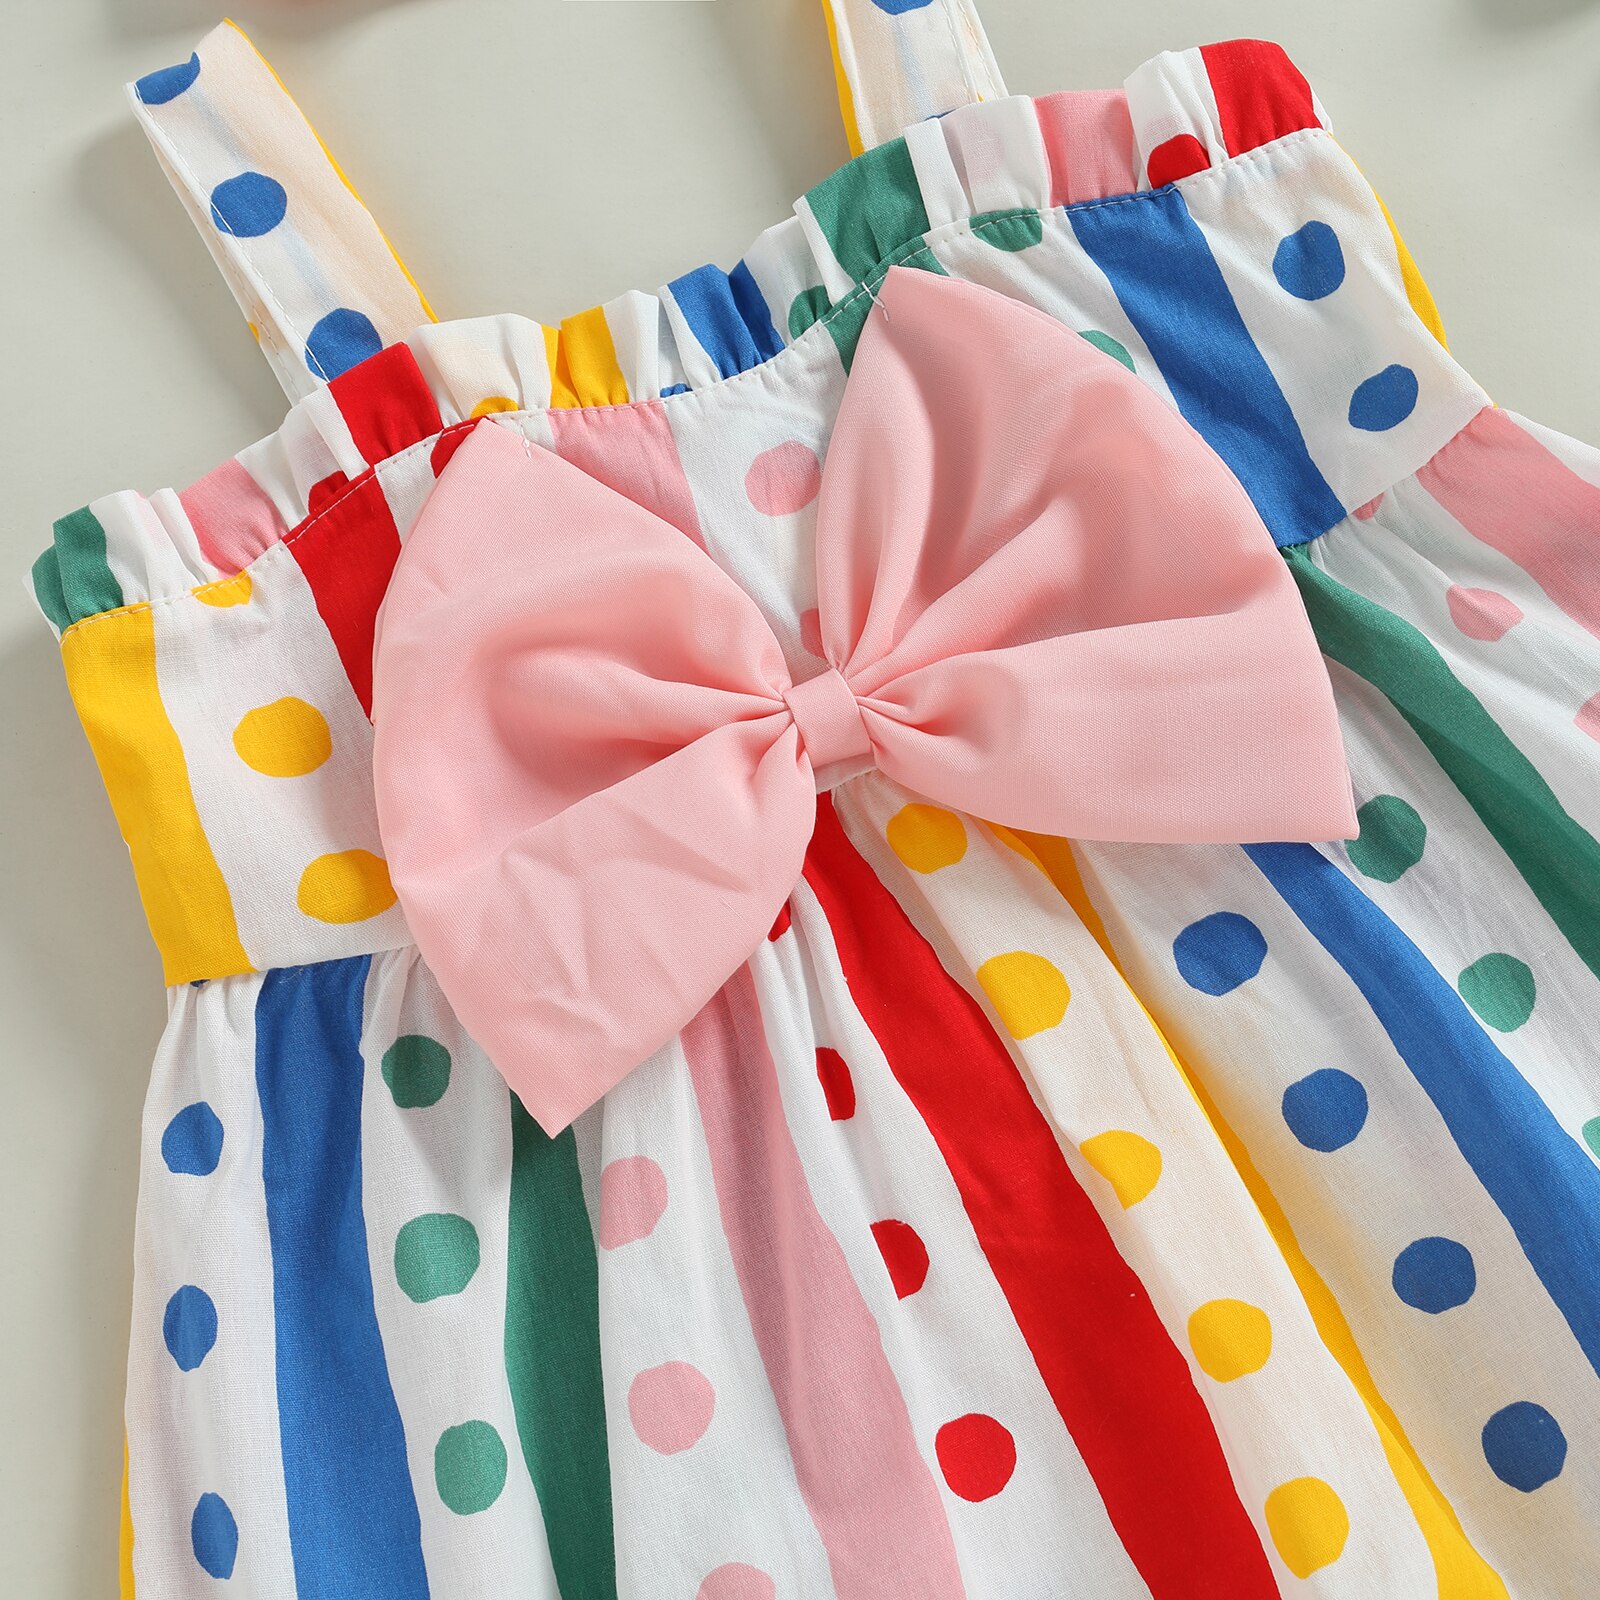 Pudcoco-Infant-Baby-Girl-Slip-Colorful-Dress-Set-Sleeveless-Striped-Dots-Print-Bowknot-A-line-Dress-3